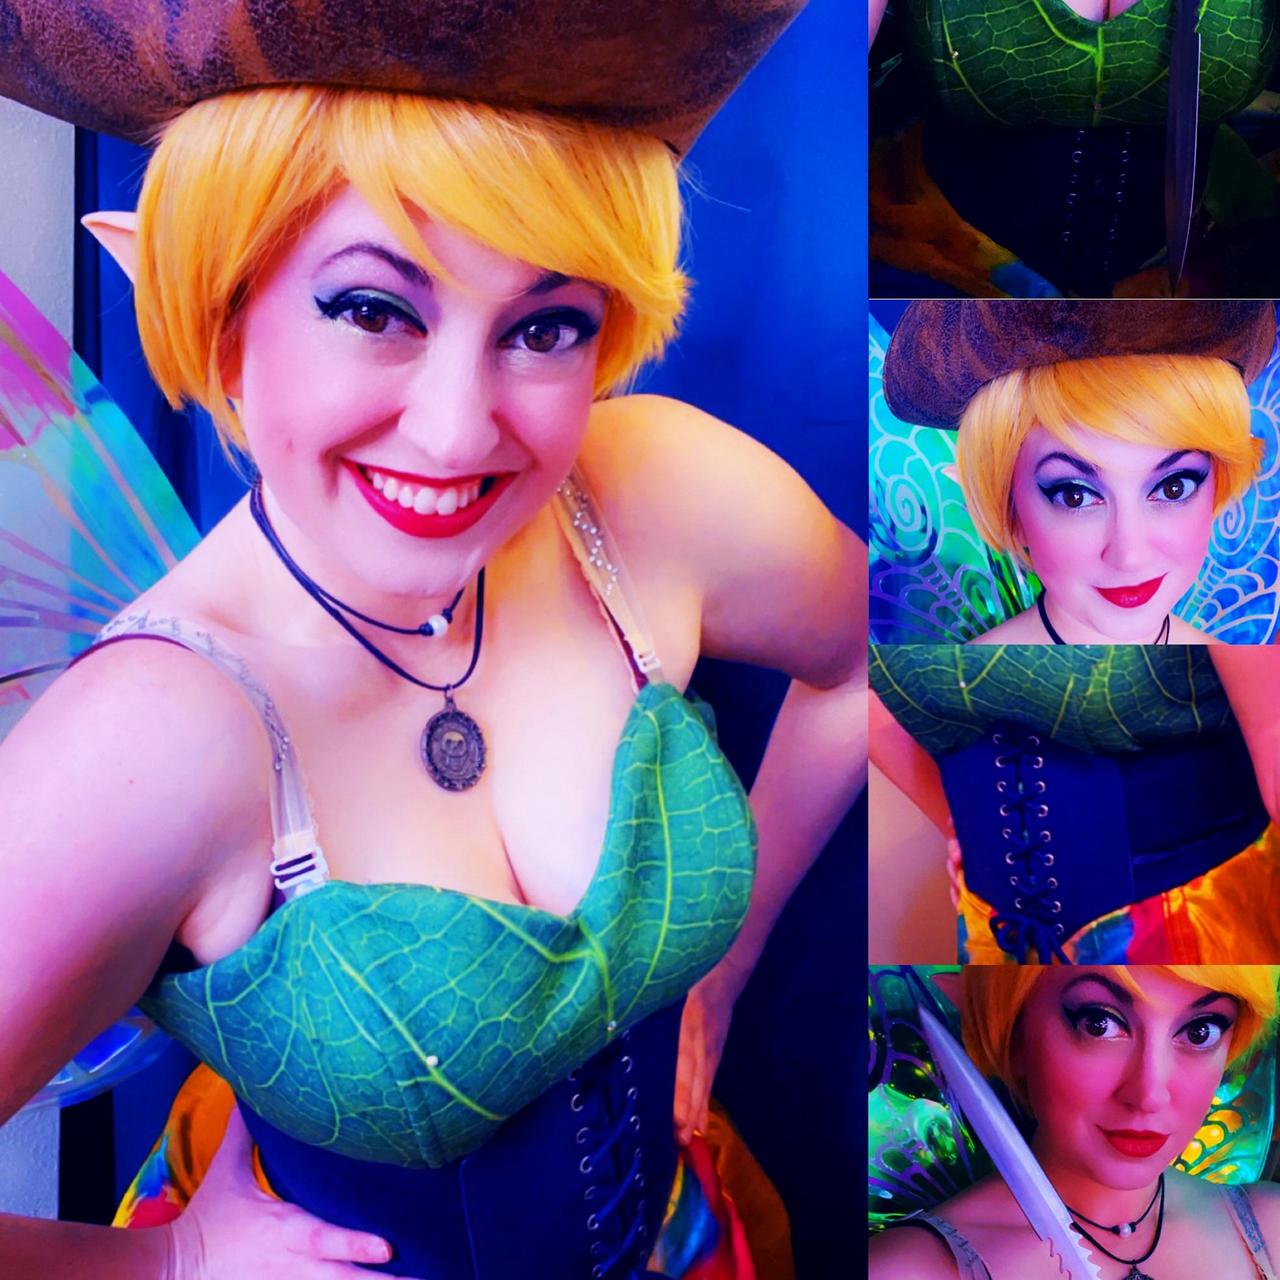 Pirate Tinkerbell Twitch Sub Goal Cosplay By Me For My Stream Yesterda